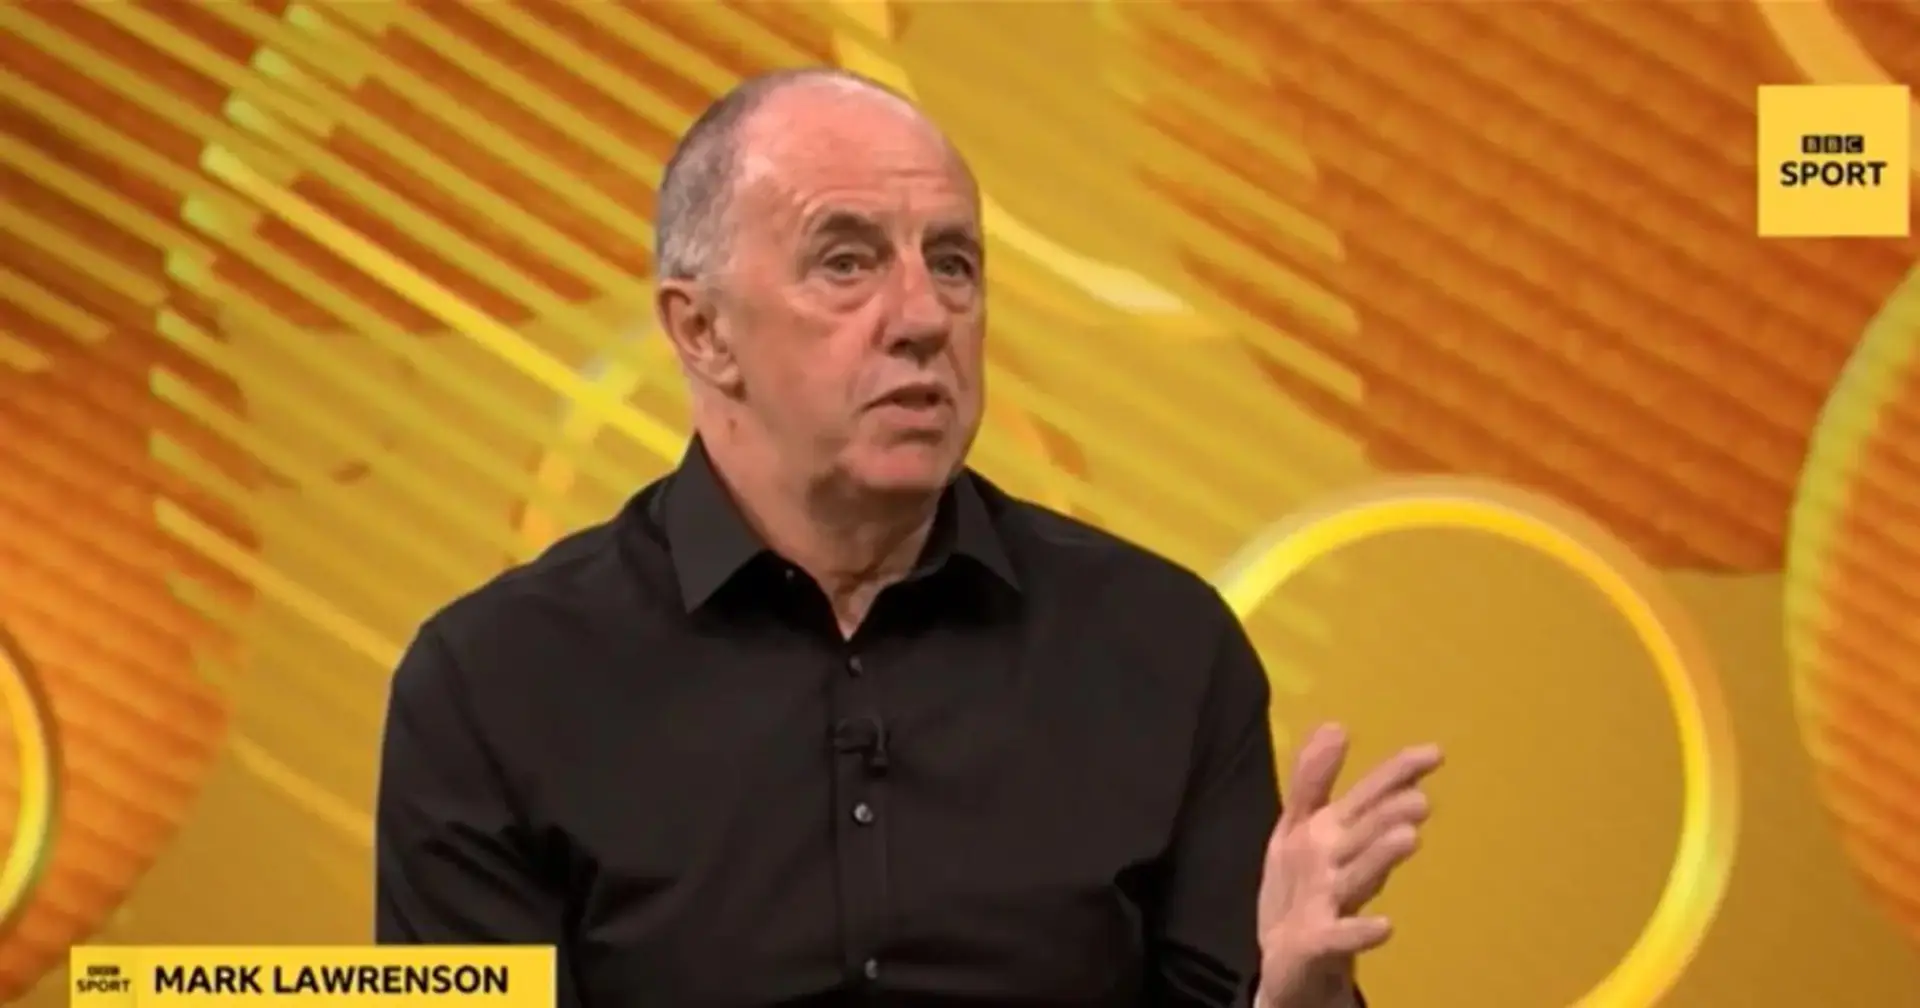 'I don't see West Ham scoring': Mark Lawrenson predicts outcome of Thursday's clash